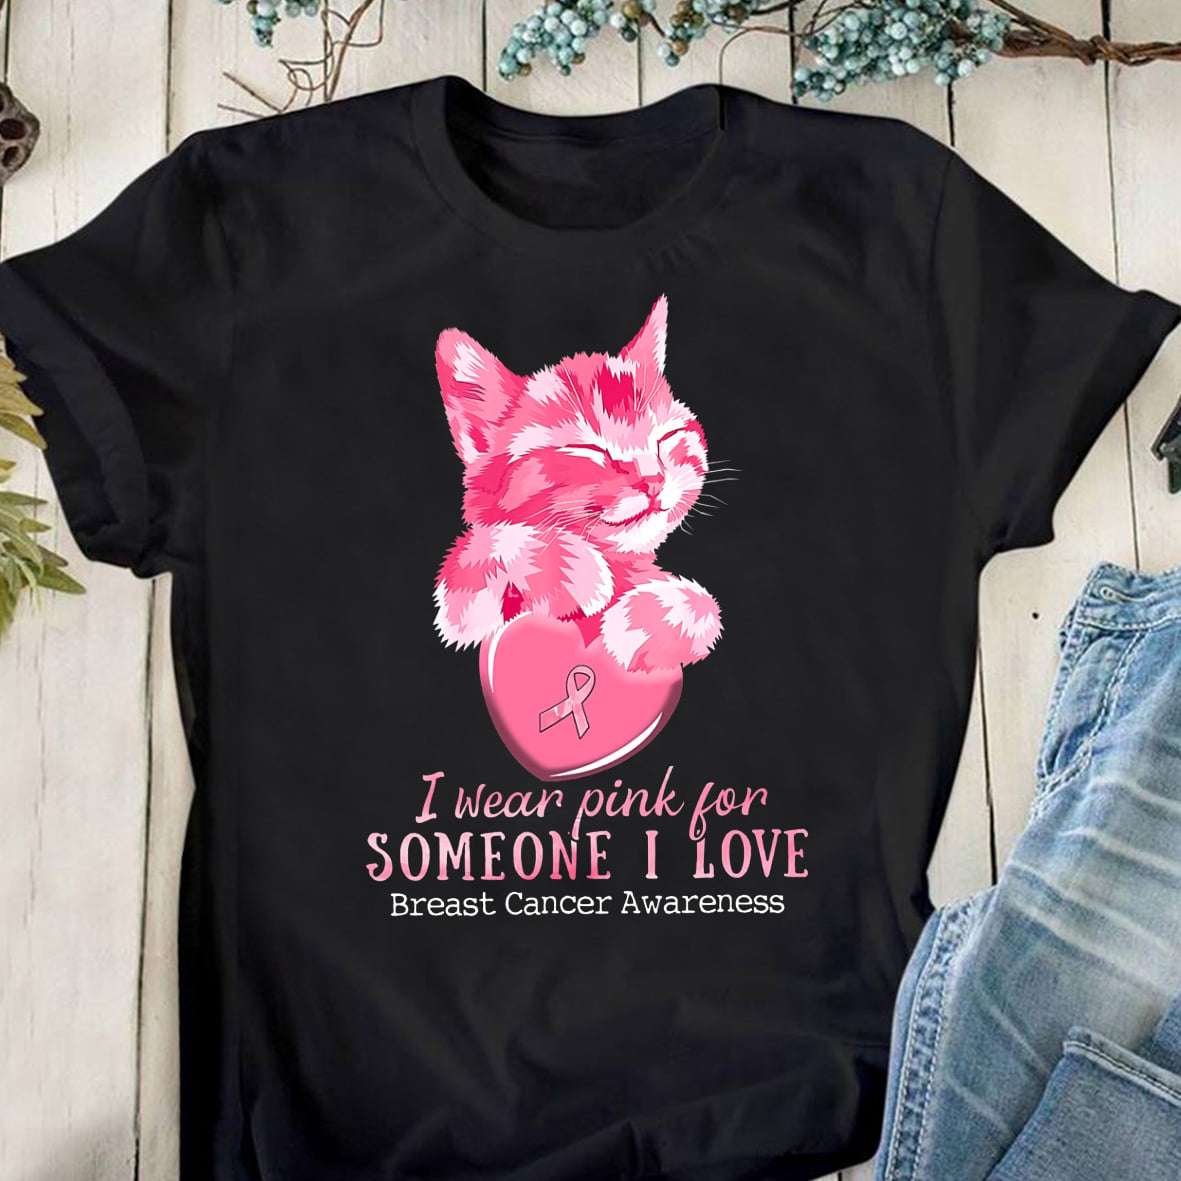 I wear pink for someone I love - Breast cancer awareness, cat heart cancer ribbon